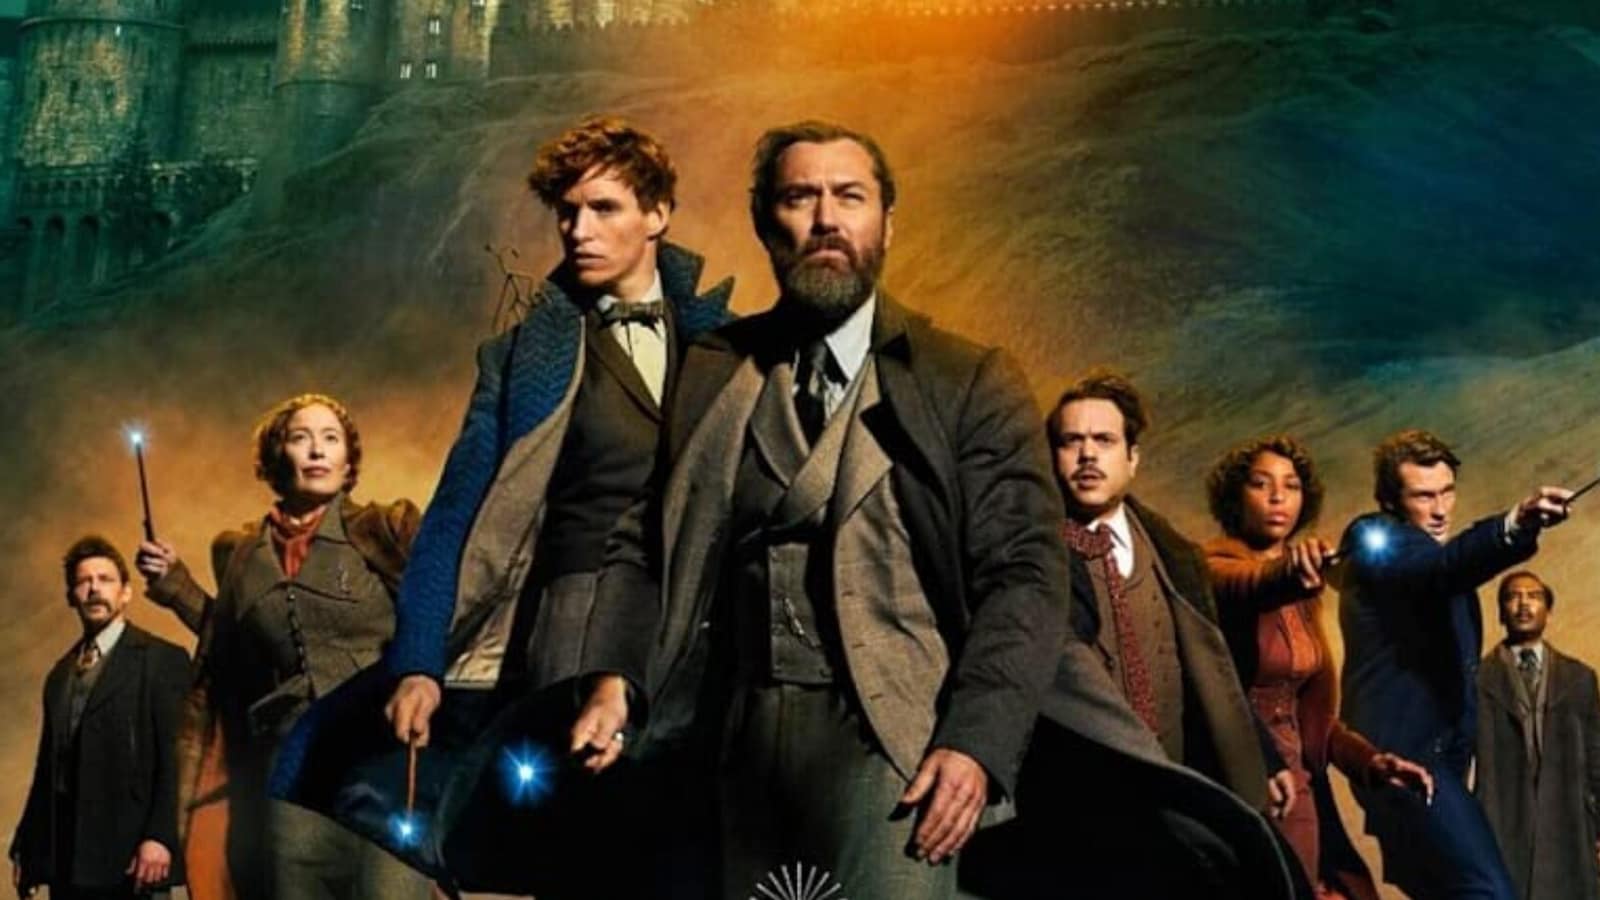 Fantastic Beasts The Secrets of Dumbledore movie review: A painful ordeal